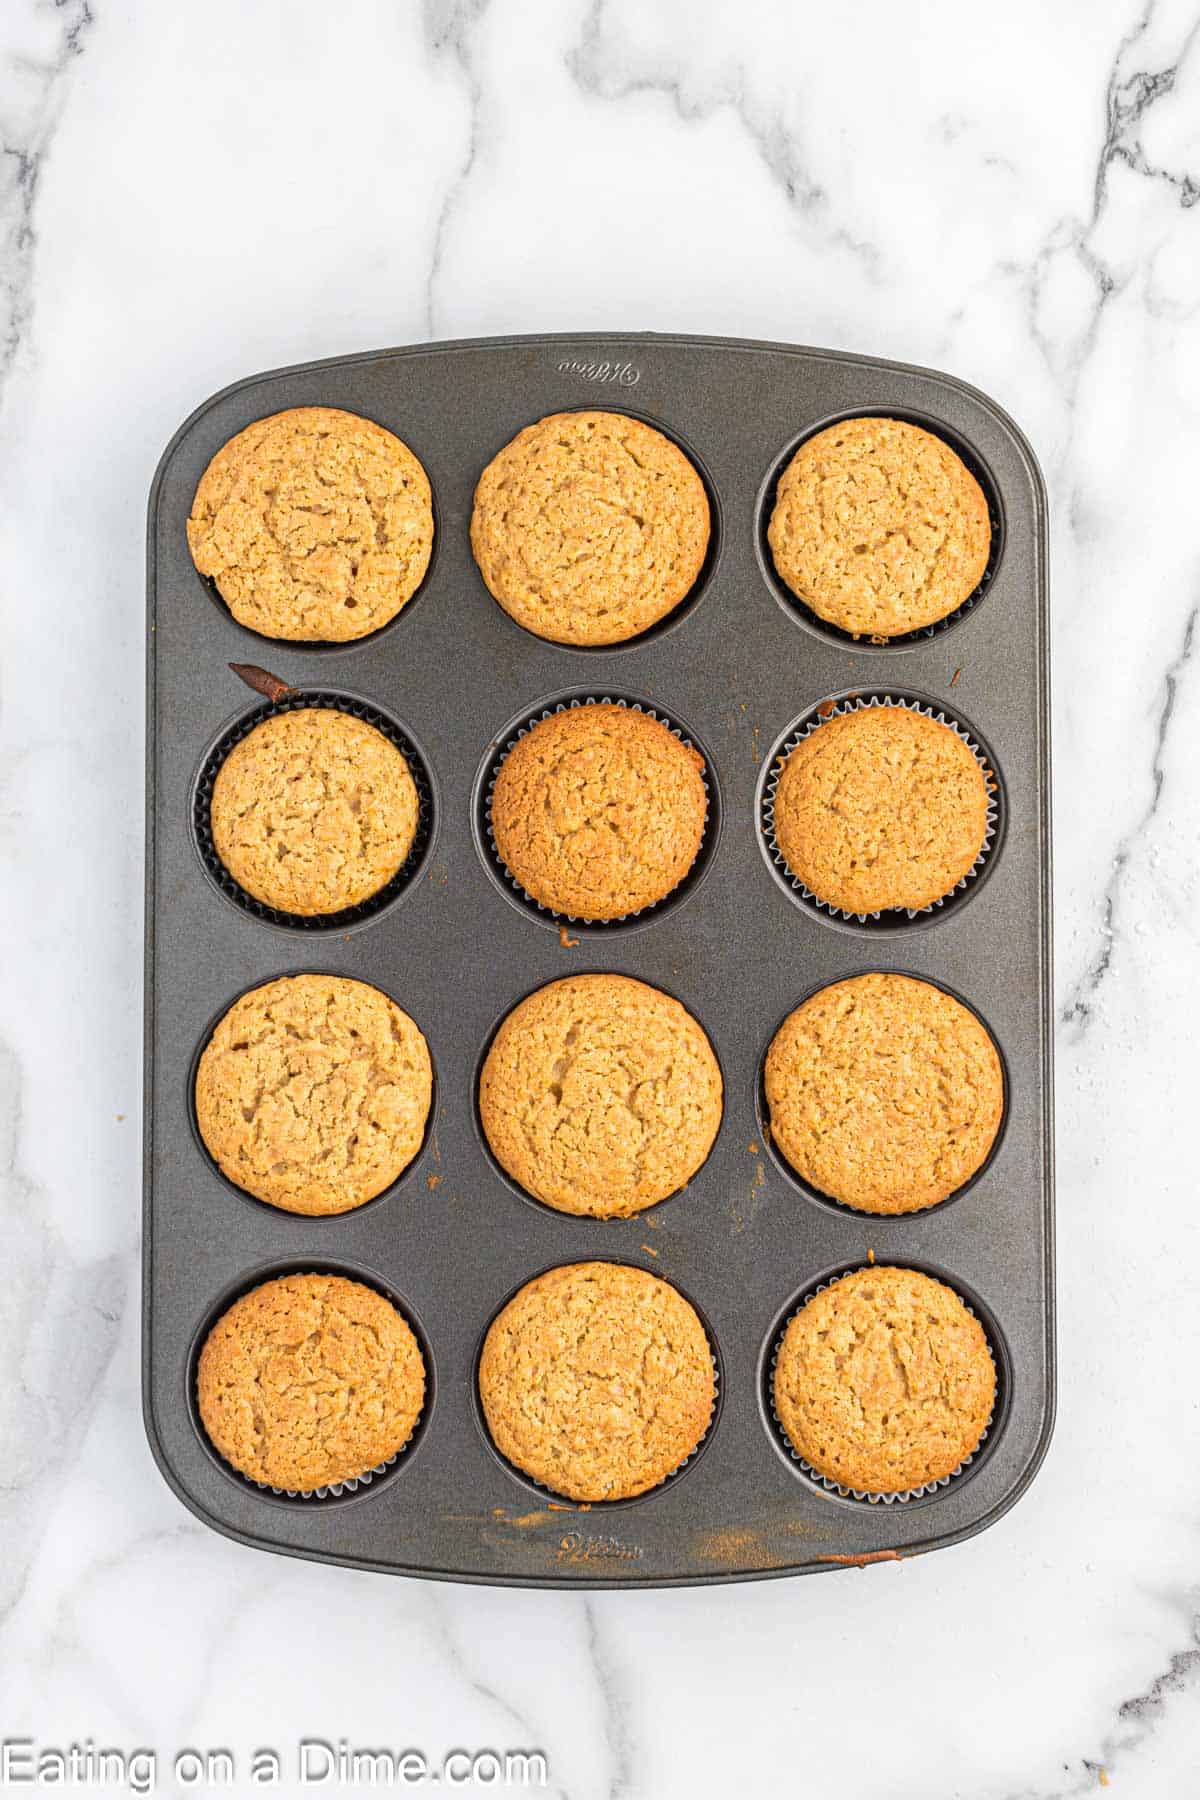 Baked peanut butter cupcakes in a muffin tin